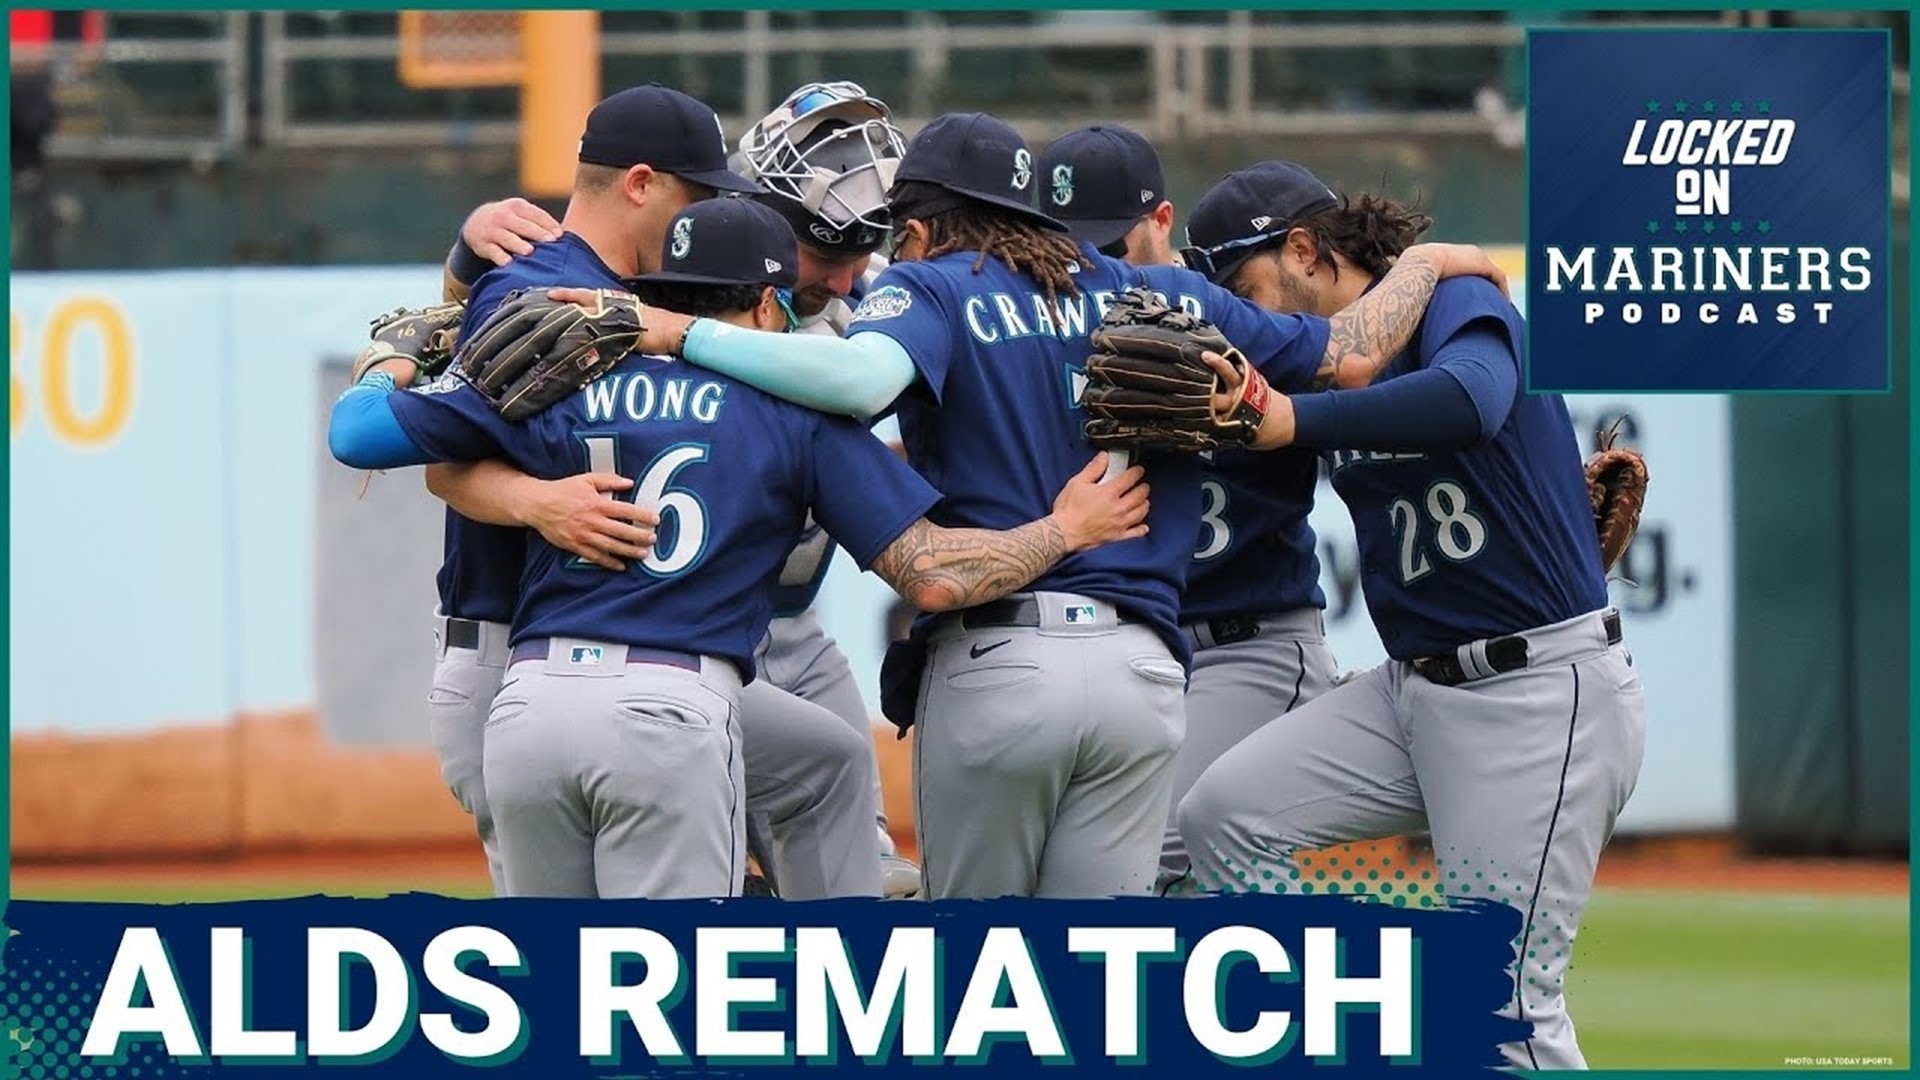 For the first time since they fell 1-0 in 18 innings in Game 3 of the ALDS, the Seattle Mariners will face off with their division rival, the Houston Astros.